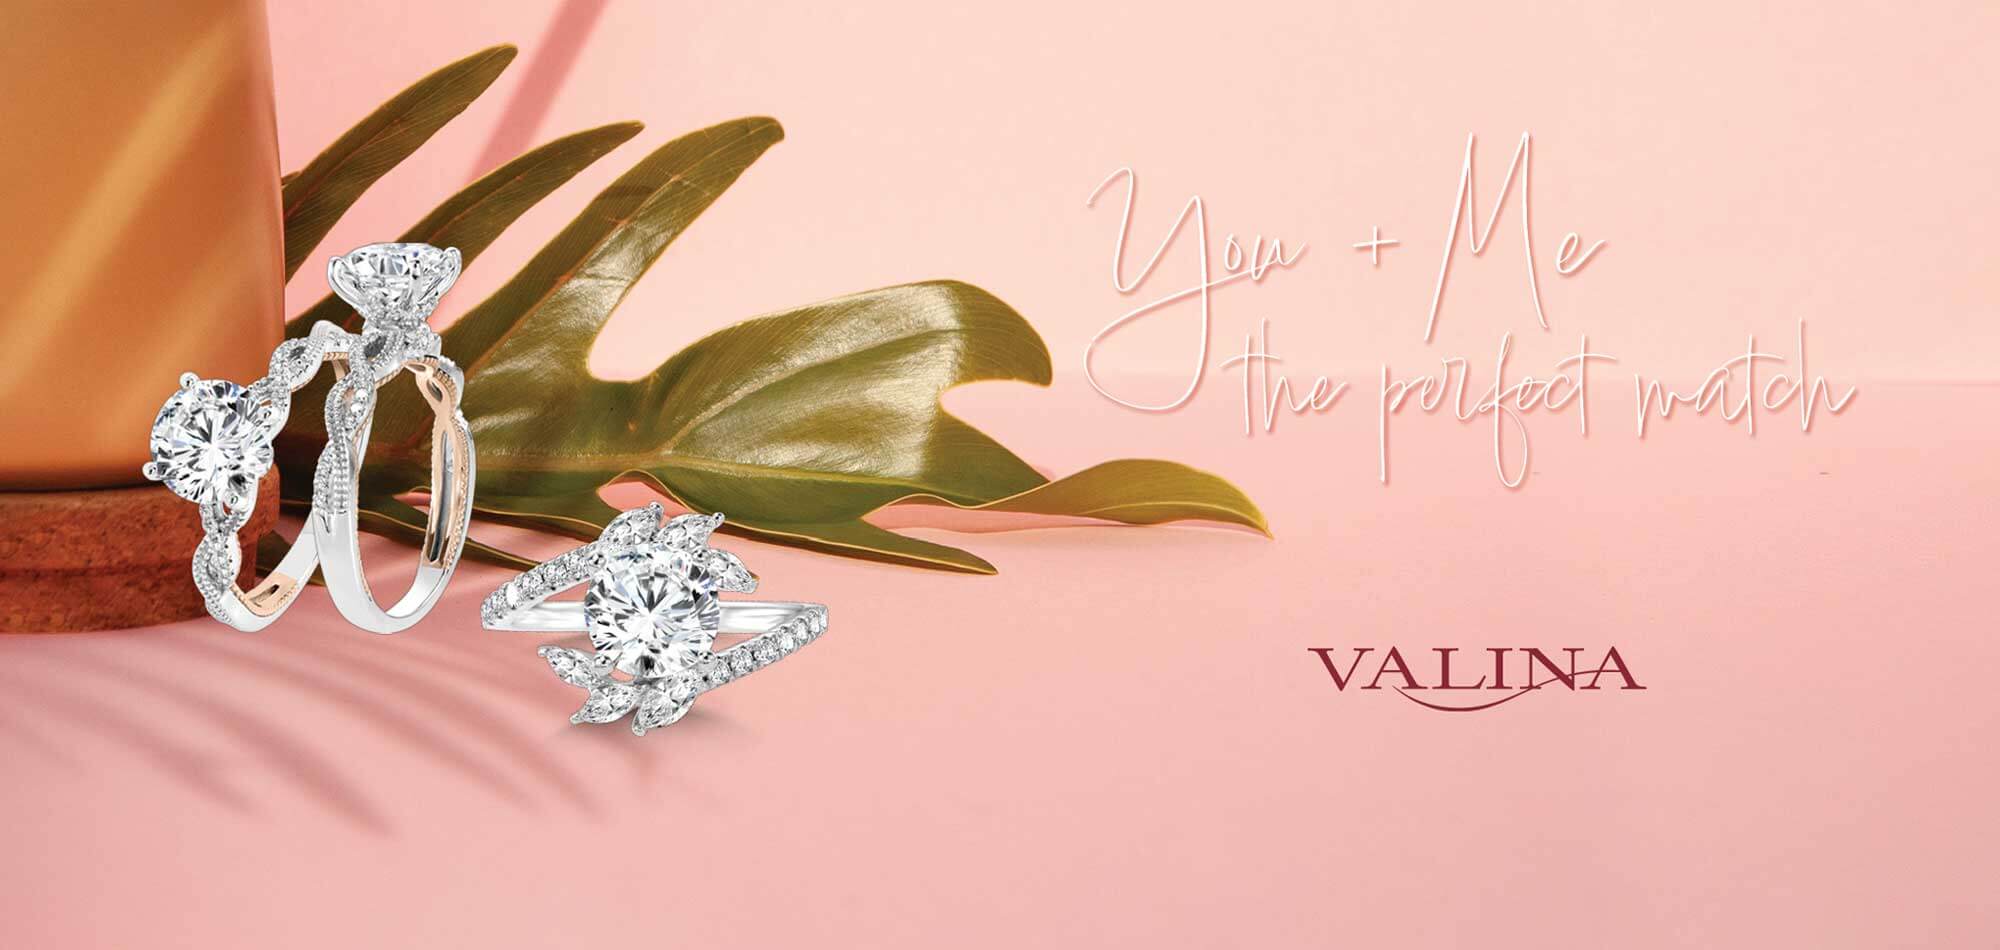 Valina Engagement Ring Collection at M&M Jewelers